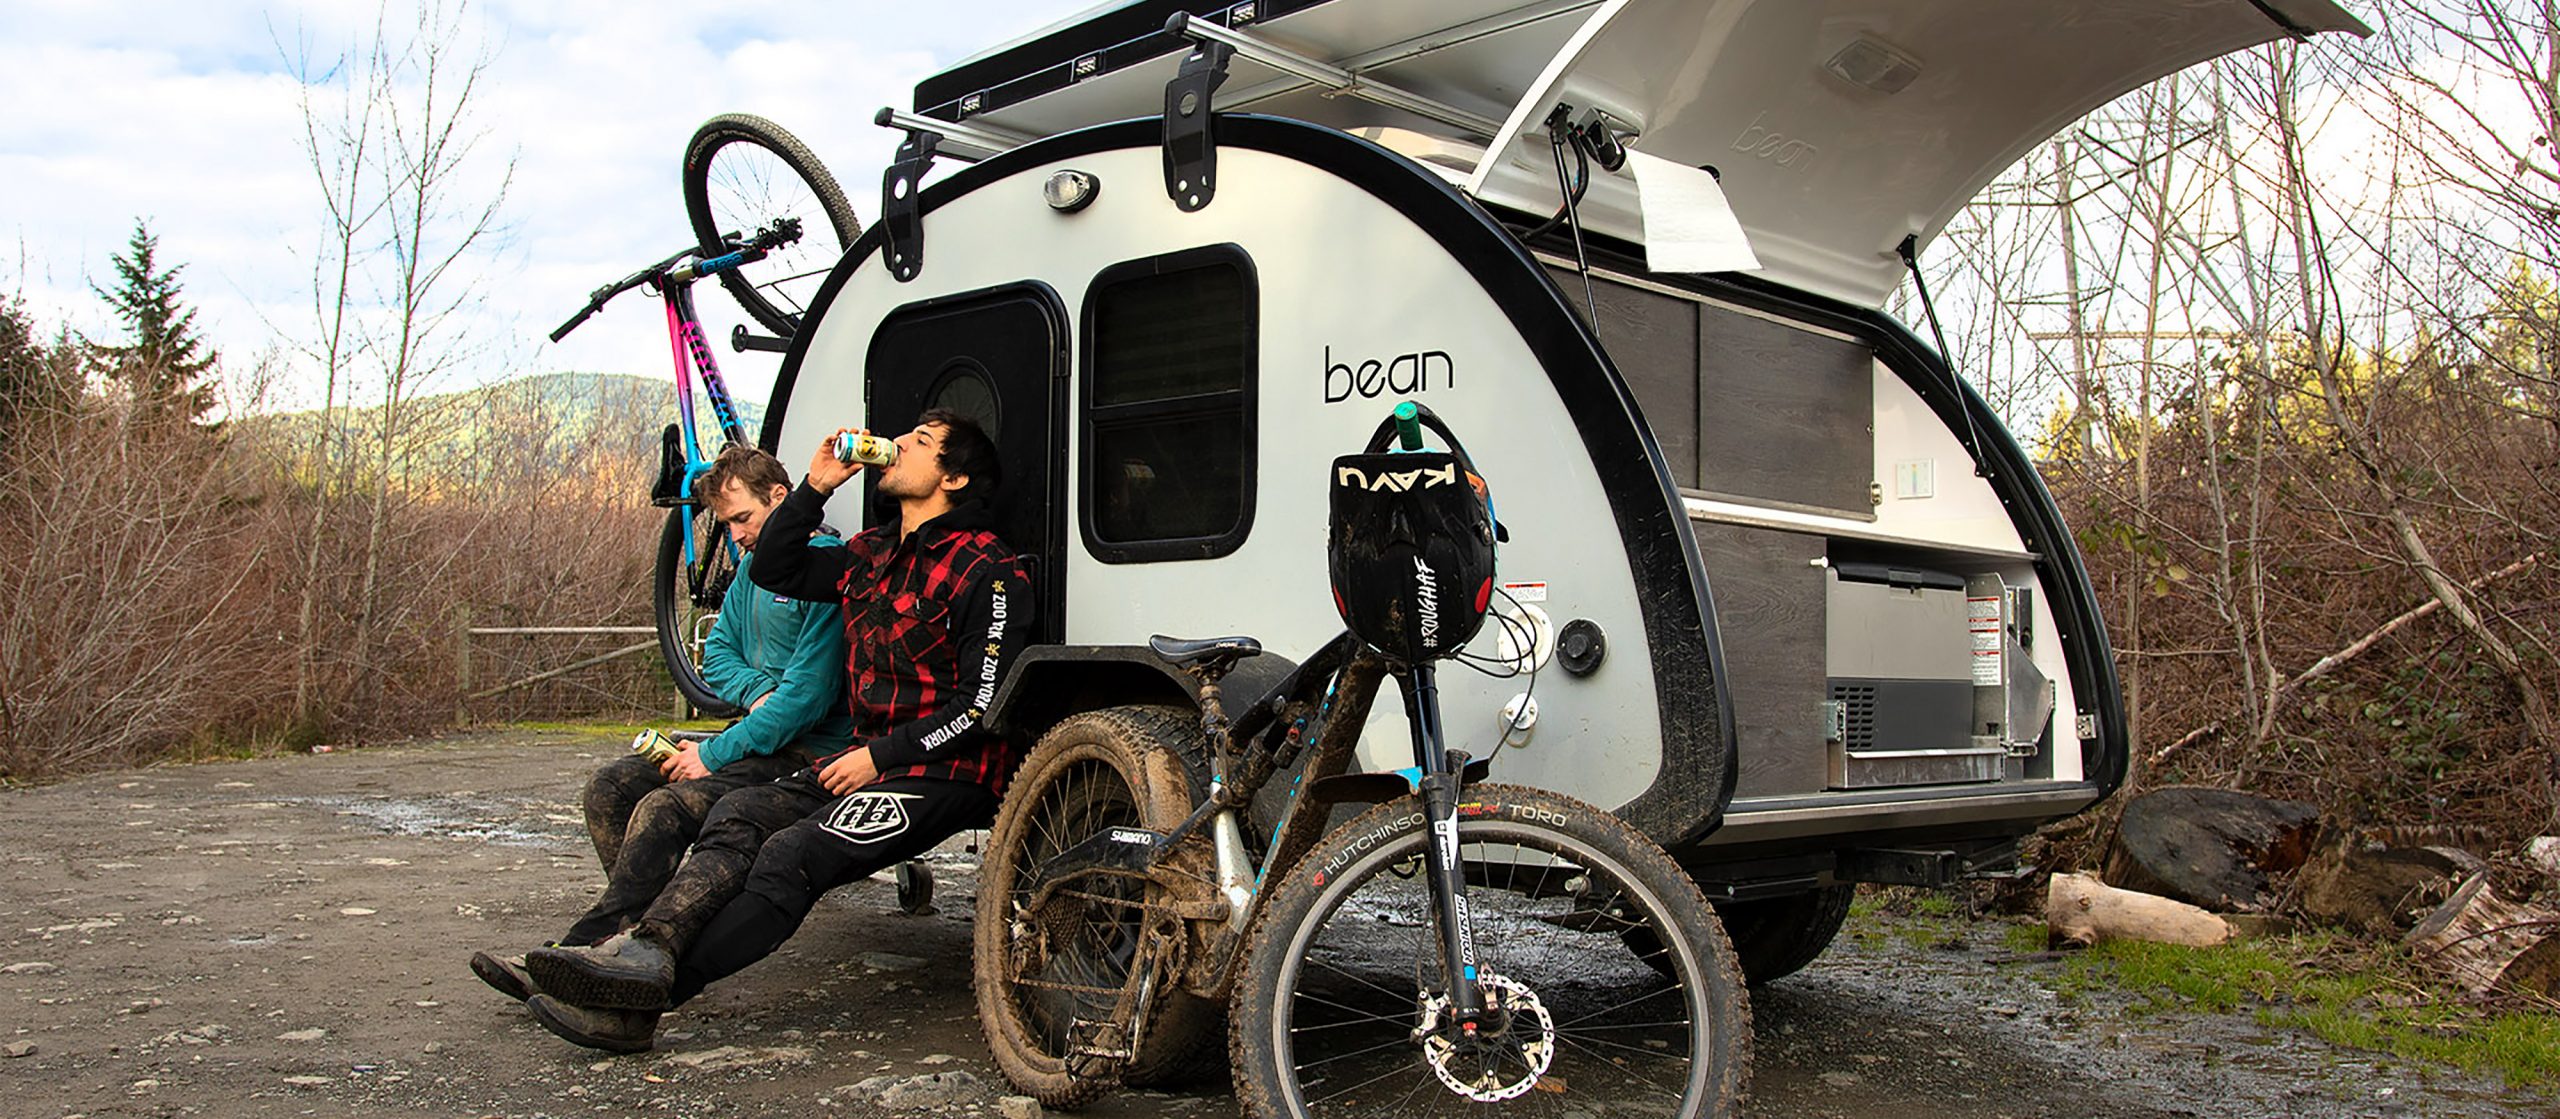 Professional Mountain Bikers rest on a teardrop trailer at the end of long day.